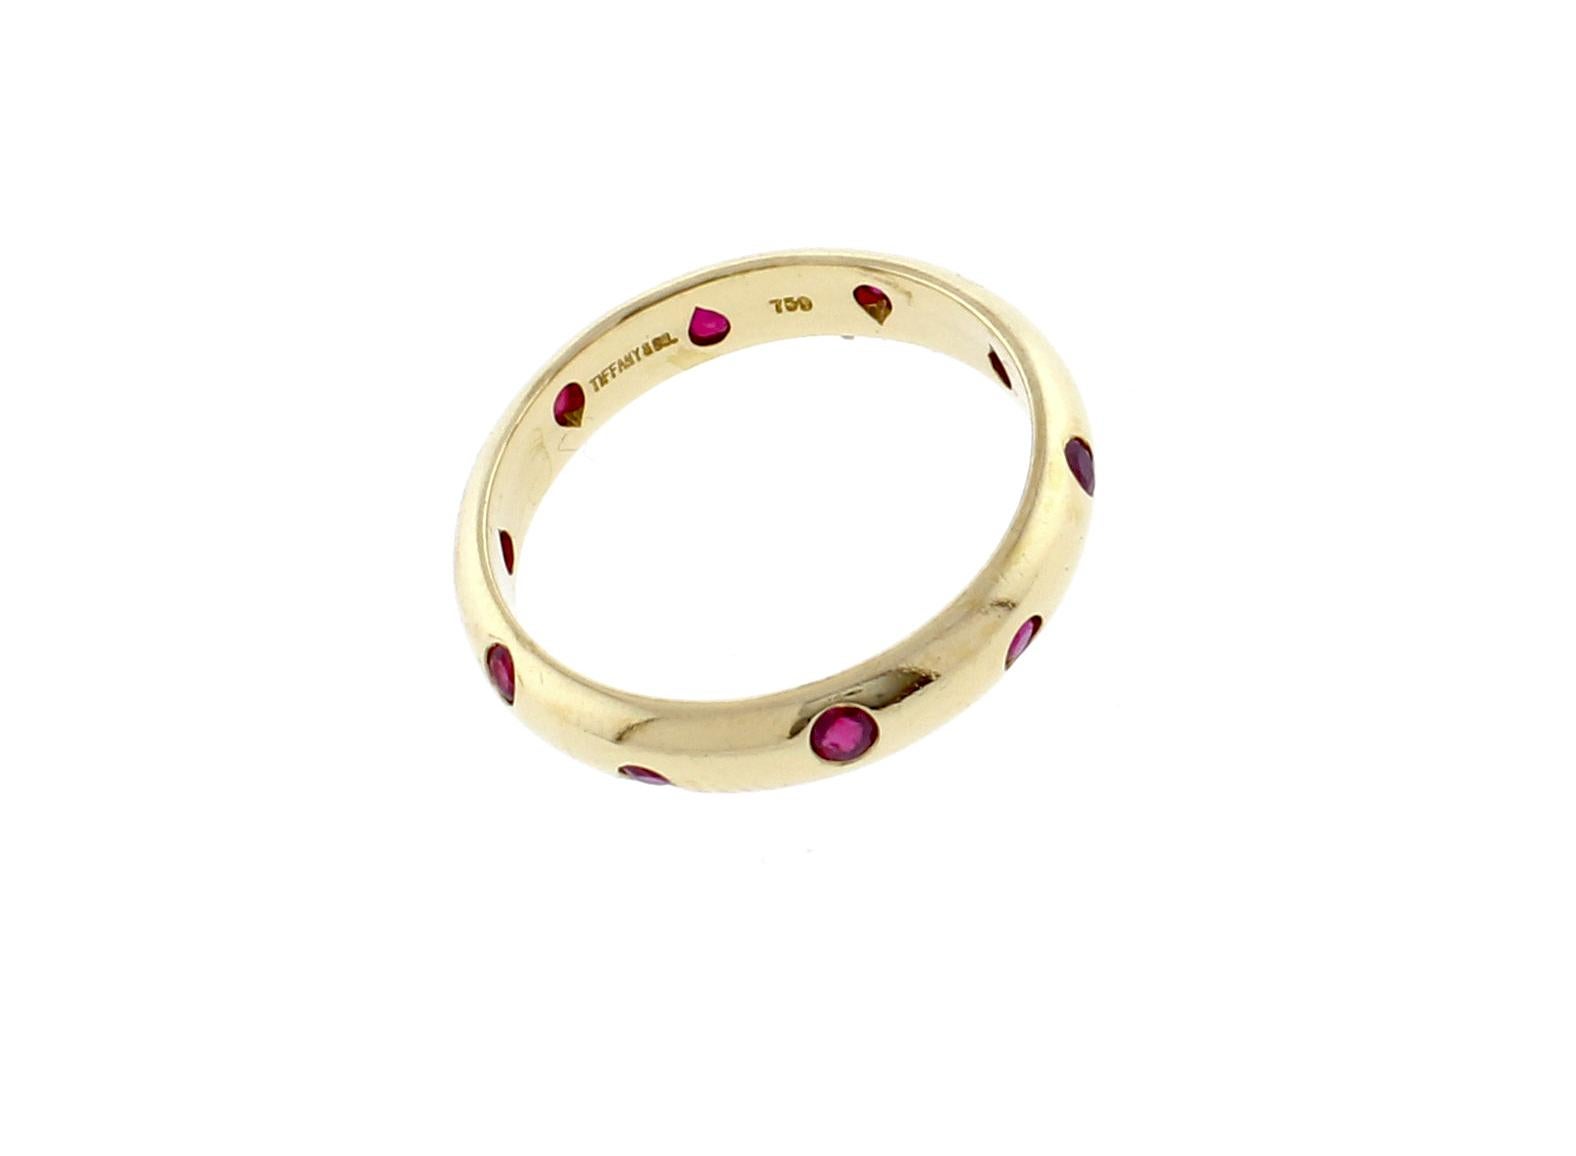 From Tiffany & Co.'s Etoile collection there 18 karat yellow Gold Ruby Band Ring
♦ Designer / Hallmarks: Tiffany & Co
♦ Metal: 18 karat, 
♦ Gem stone: Ruby
♦ Design Era: Contemporary
♦ Circa 2002 
♦ Size: 5
♦ Weight 4.7 grams
♦ Packaging: Tiffany